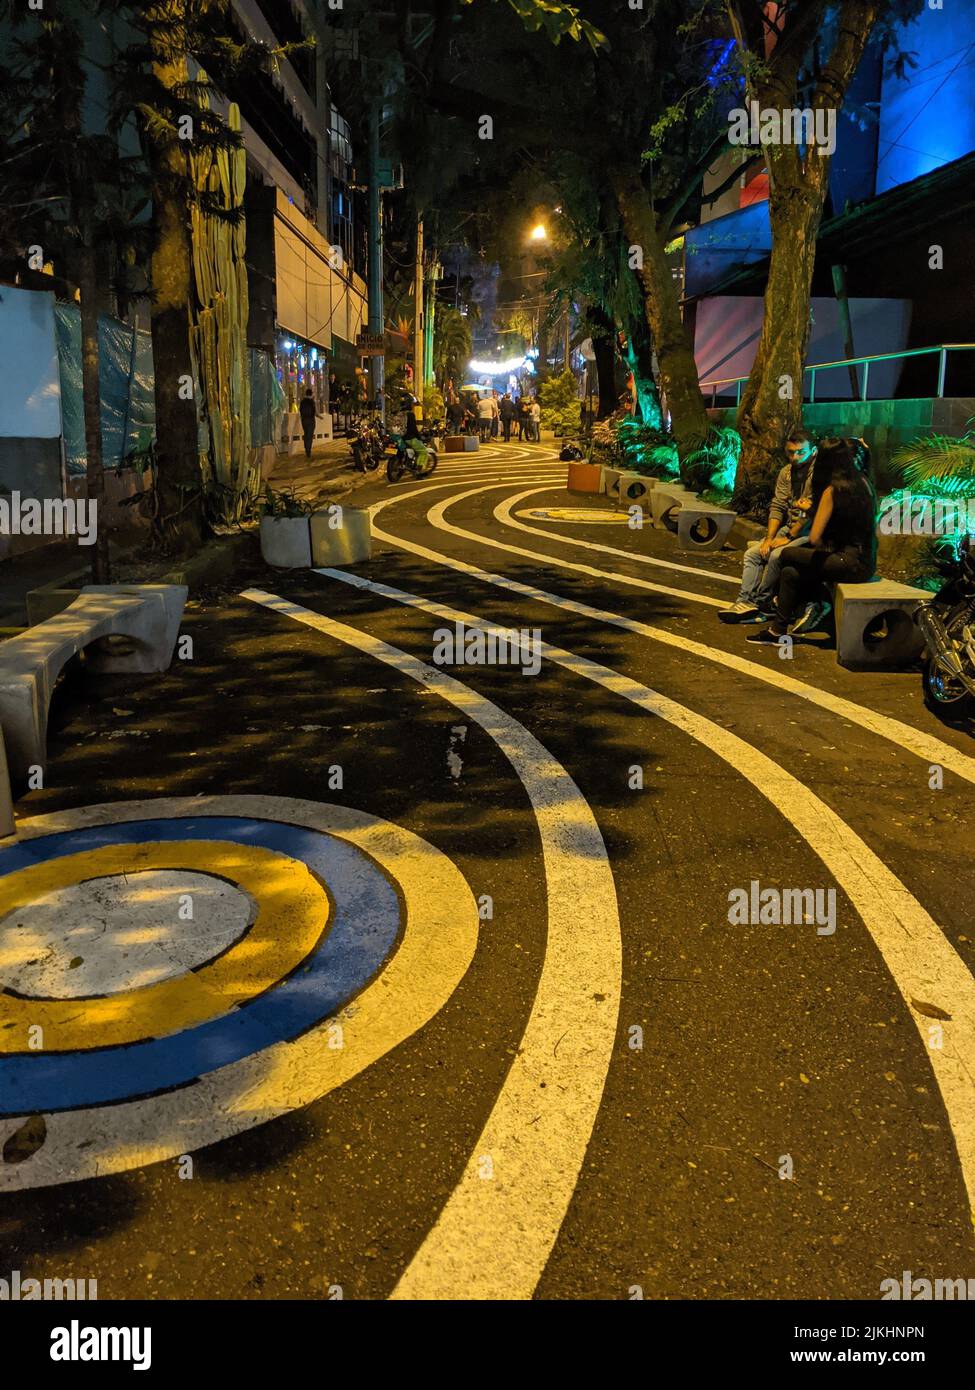 A vertical shot of a street in Medellin, Colombia at night Stock Photo